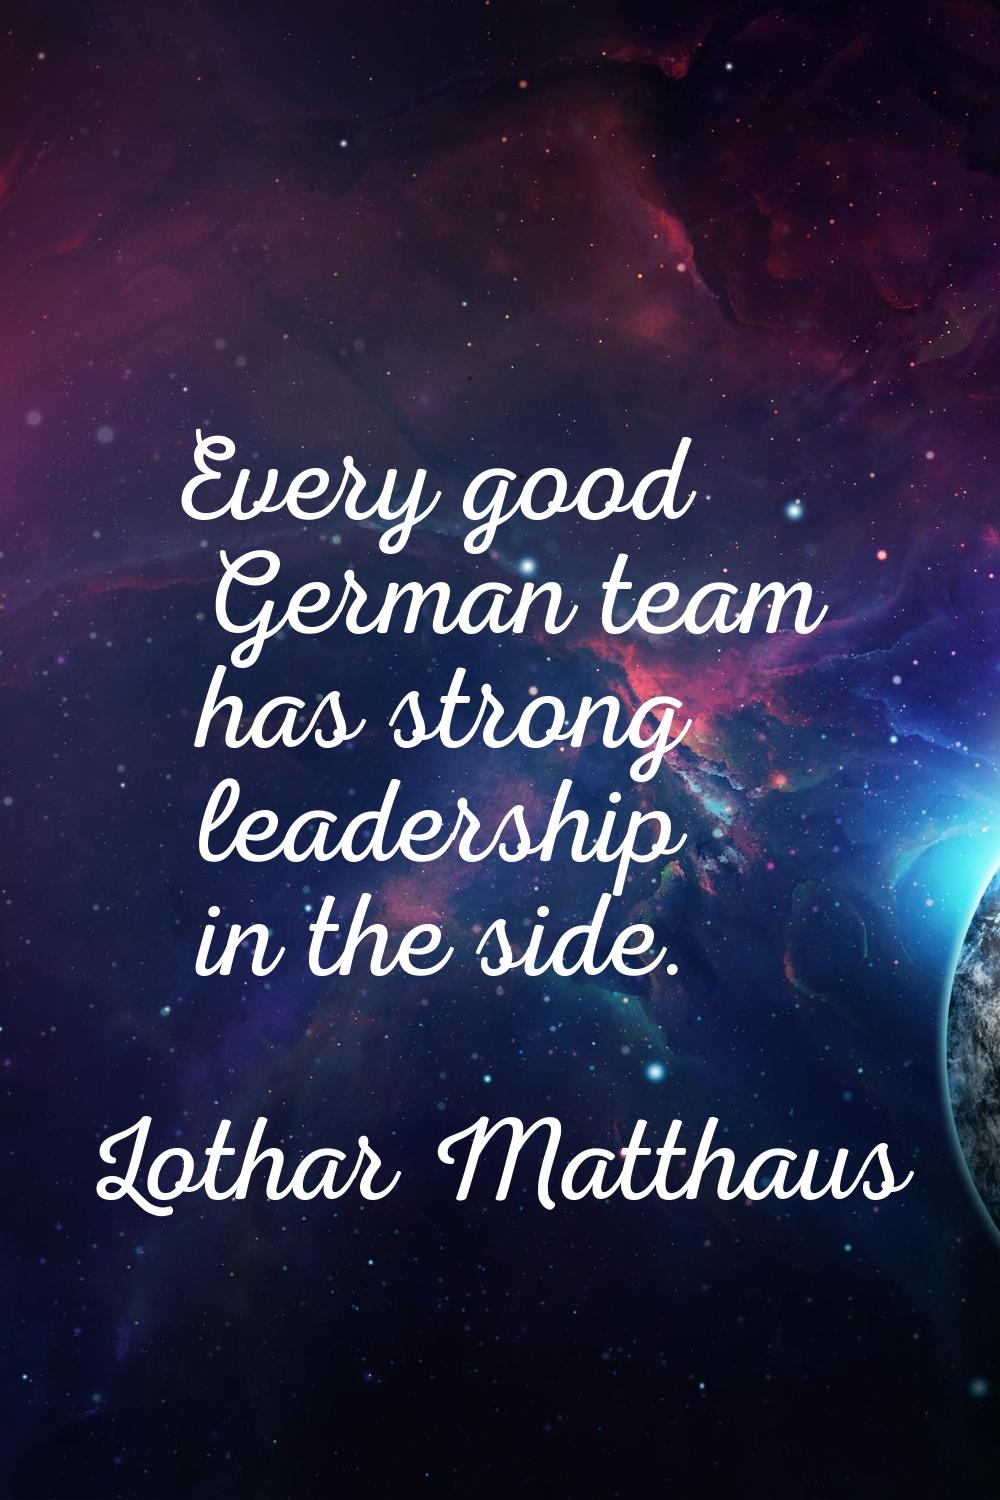 Every good German team has strong leadership in the side.